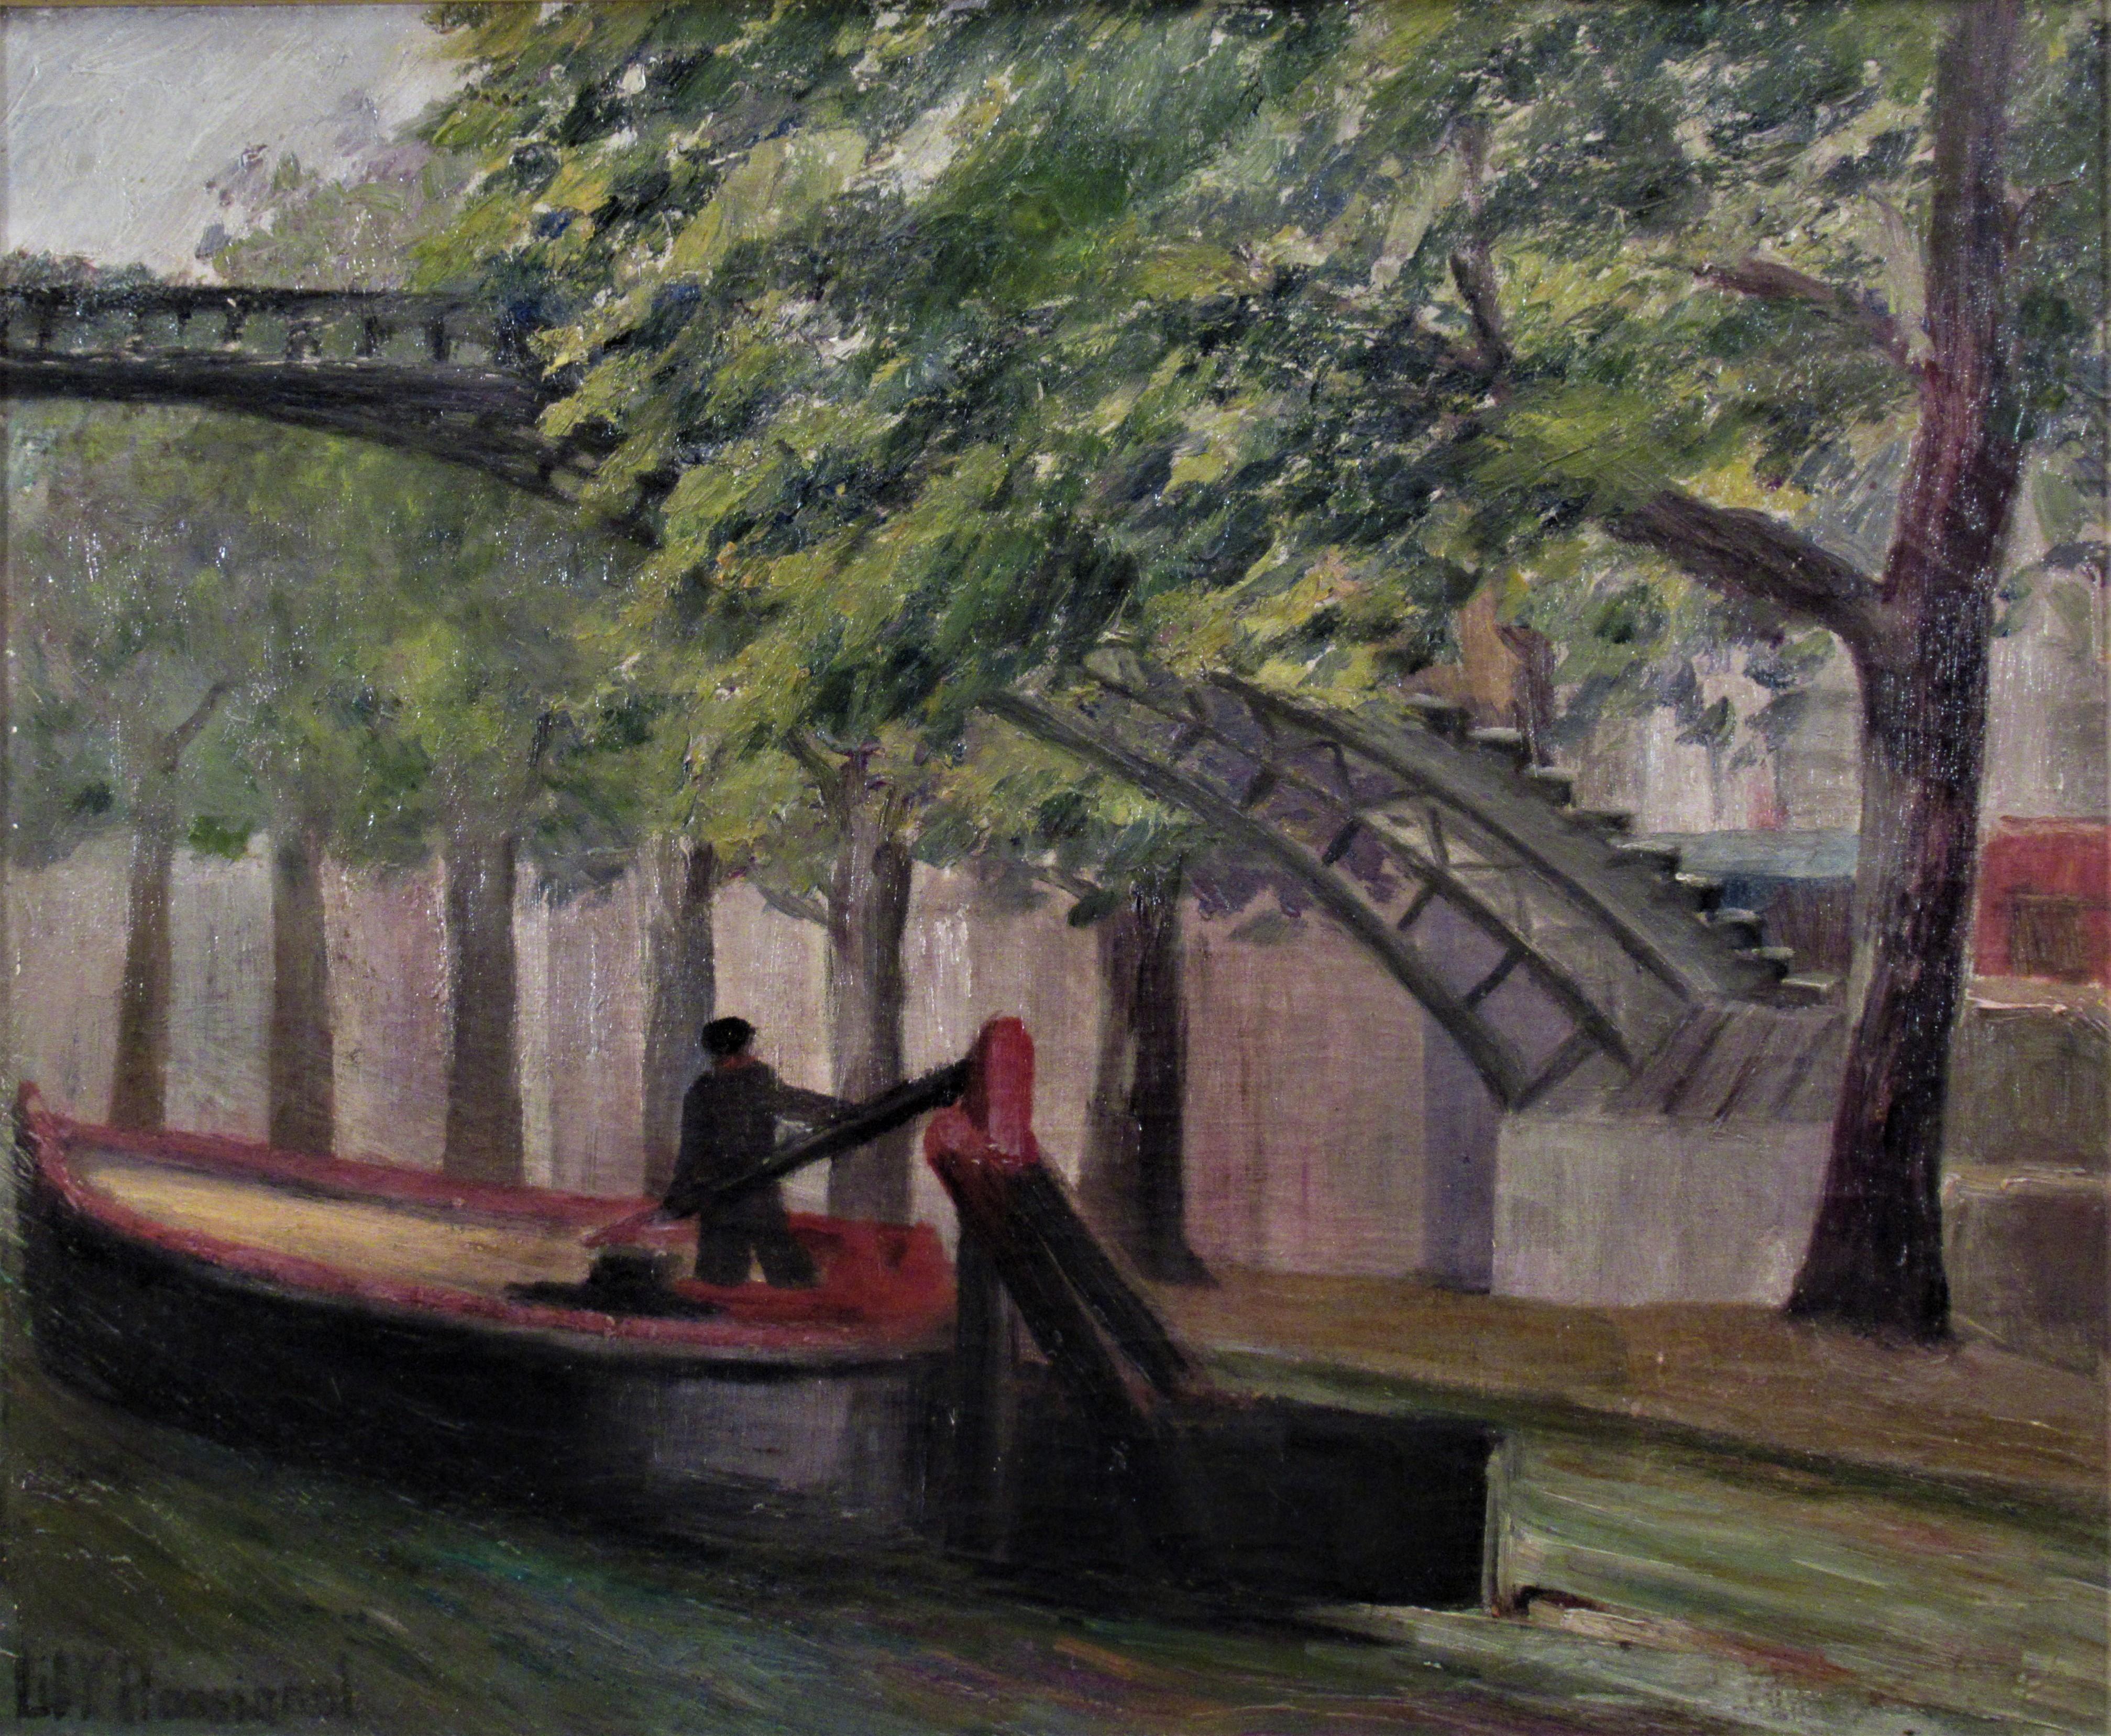 Le Canal Saint Martin, Paris - Painting by Lily Rossignol